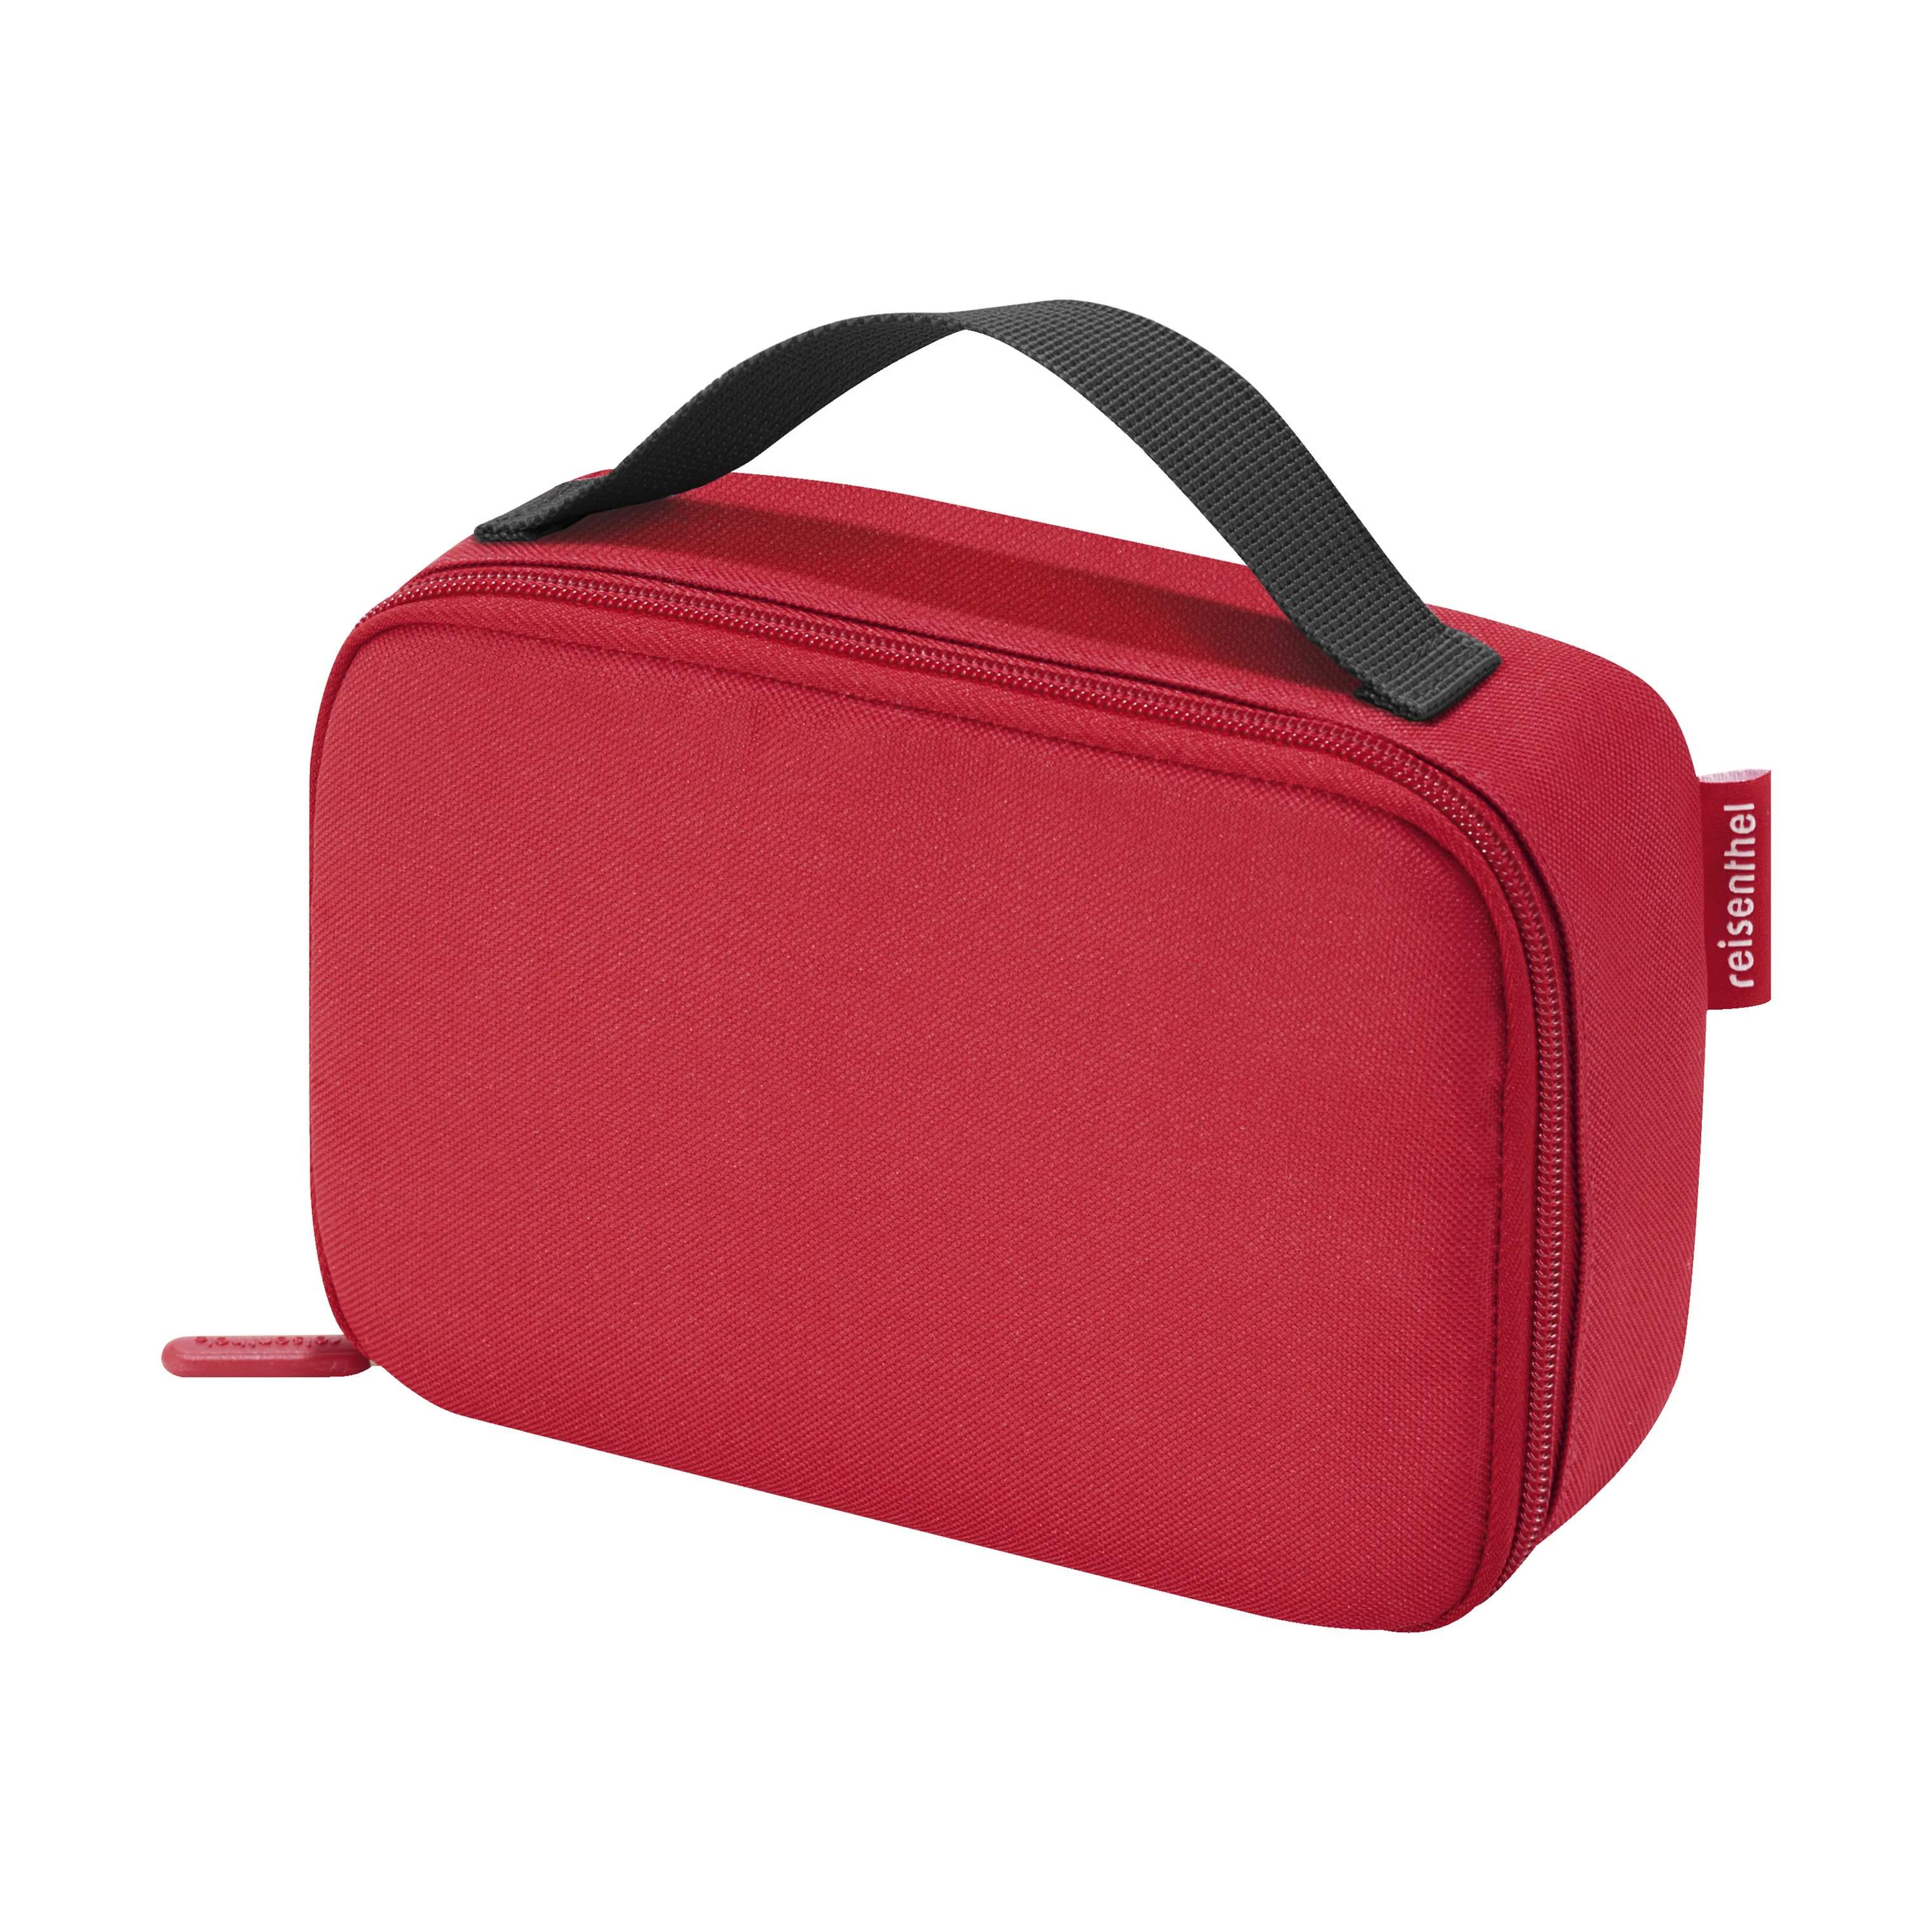 Thermocase, red, large